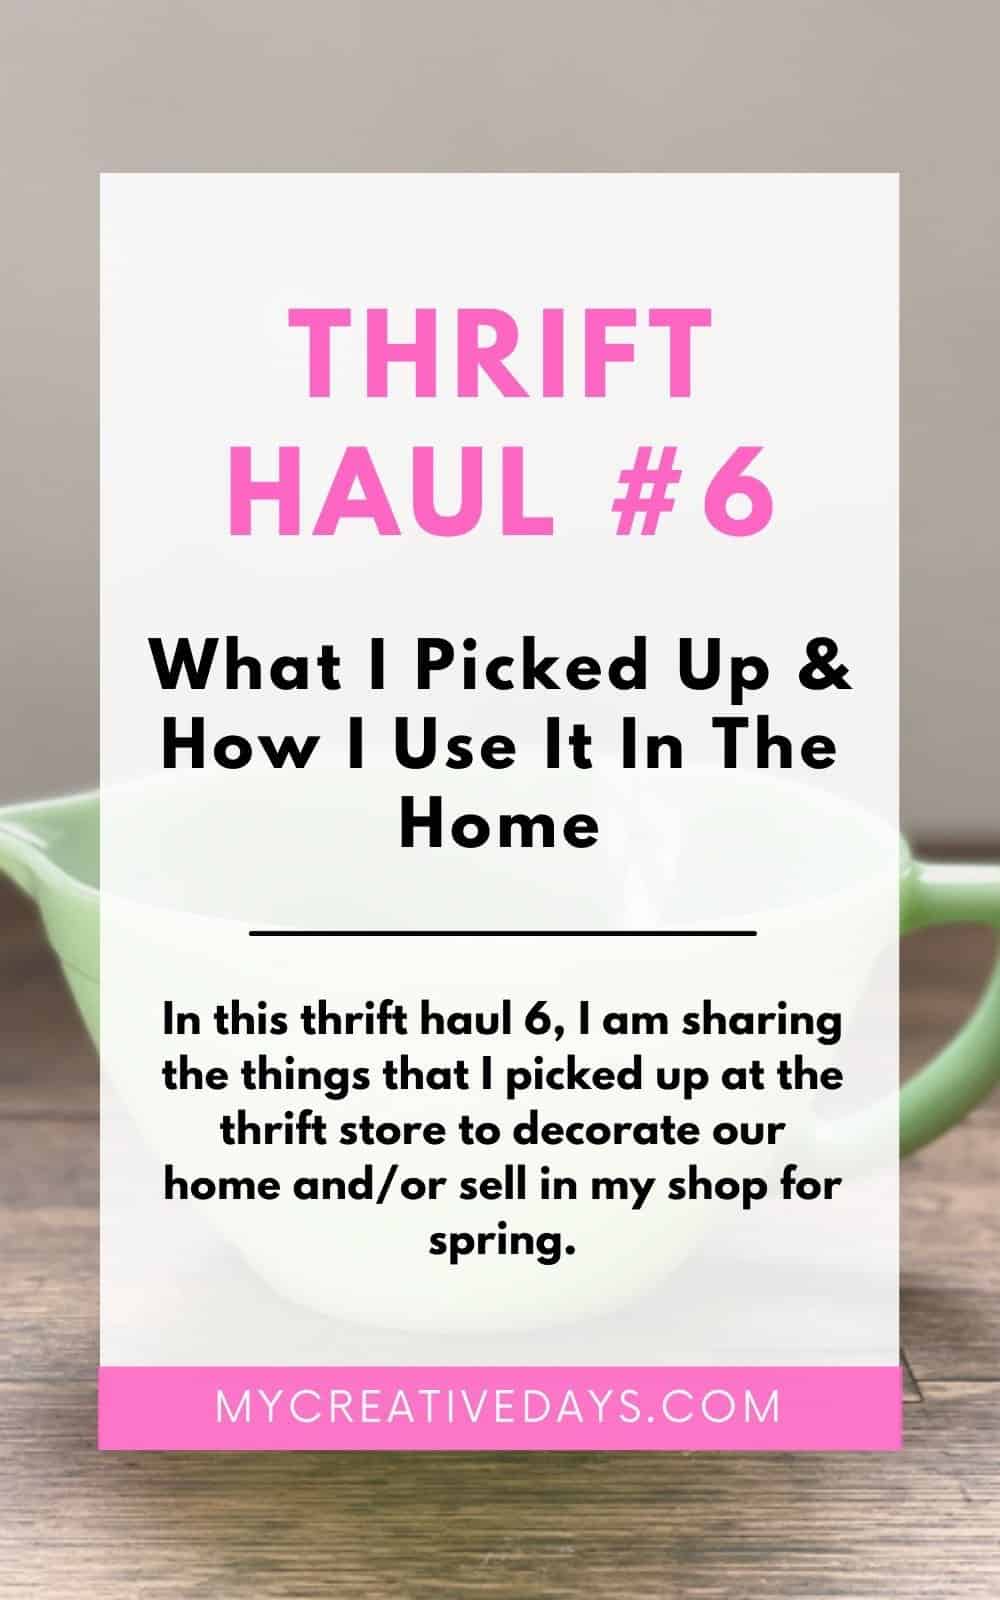 In this thrift haul 6, I am sharing the things that I picked up at the thrift store to decorate our home andor sell in my shop for spring.